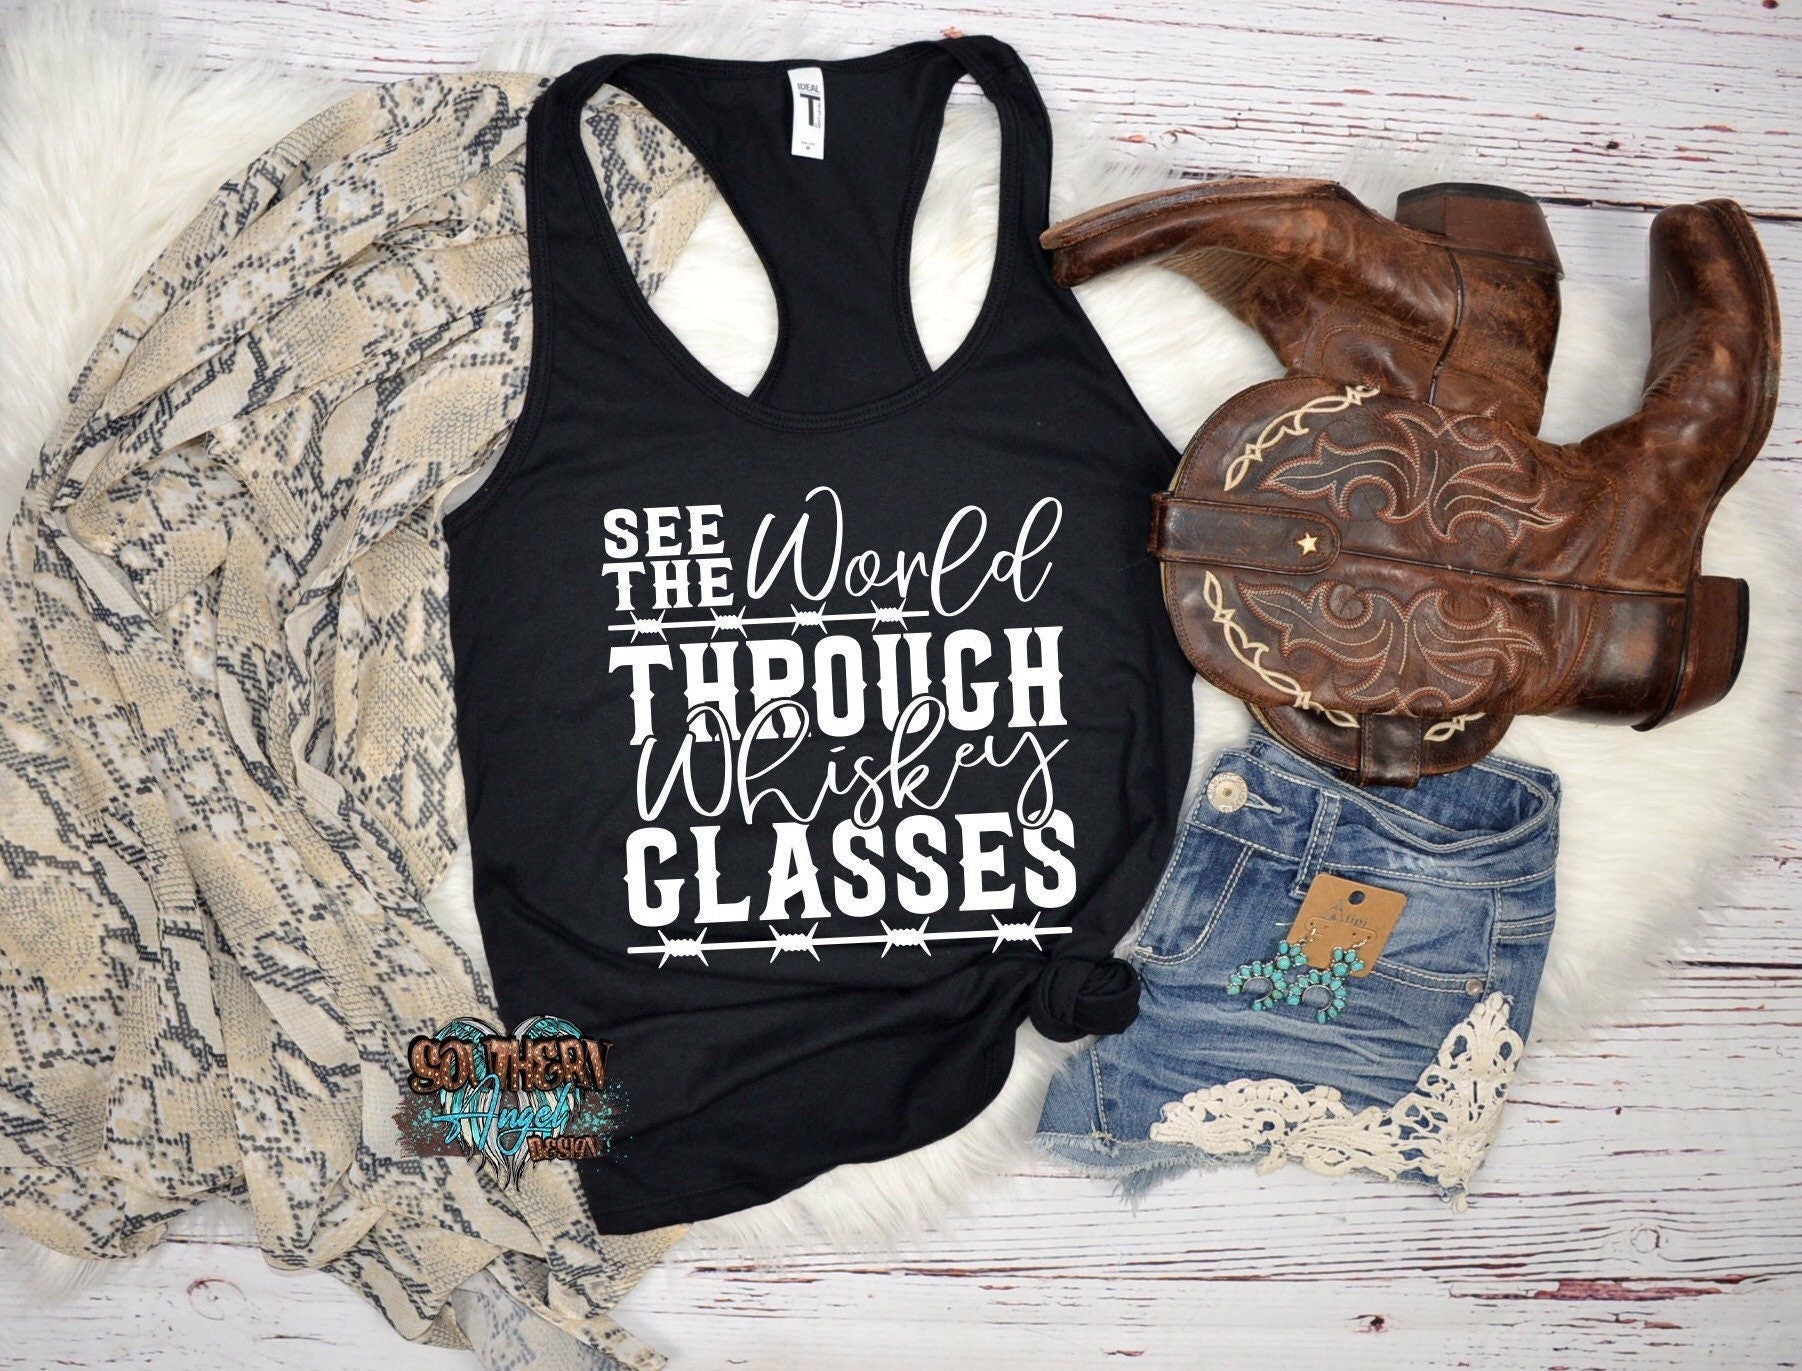 See the world through Wh*skey glasses tank